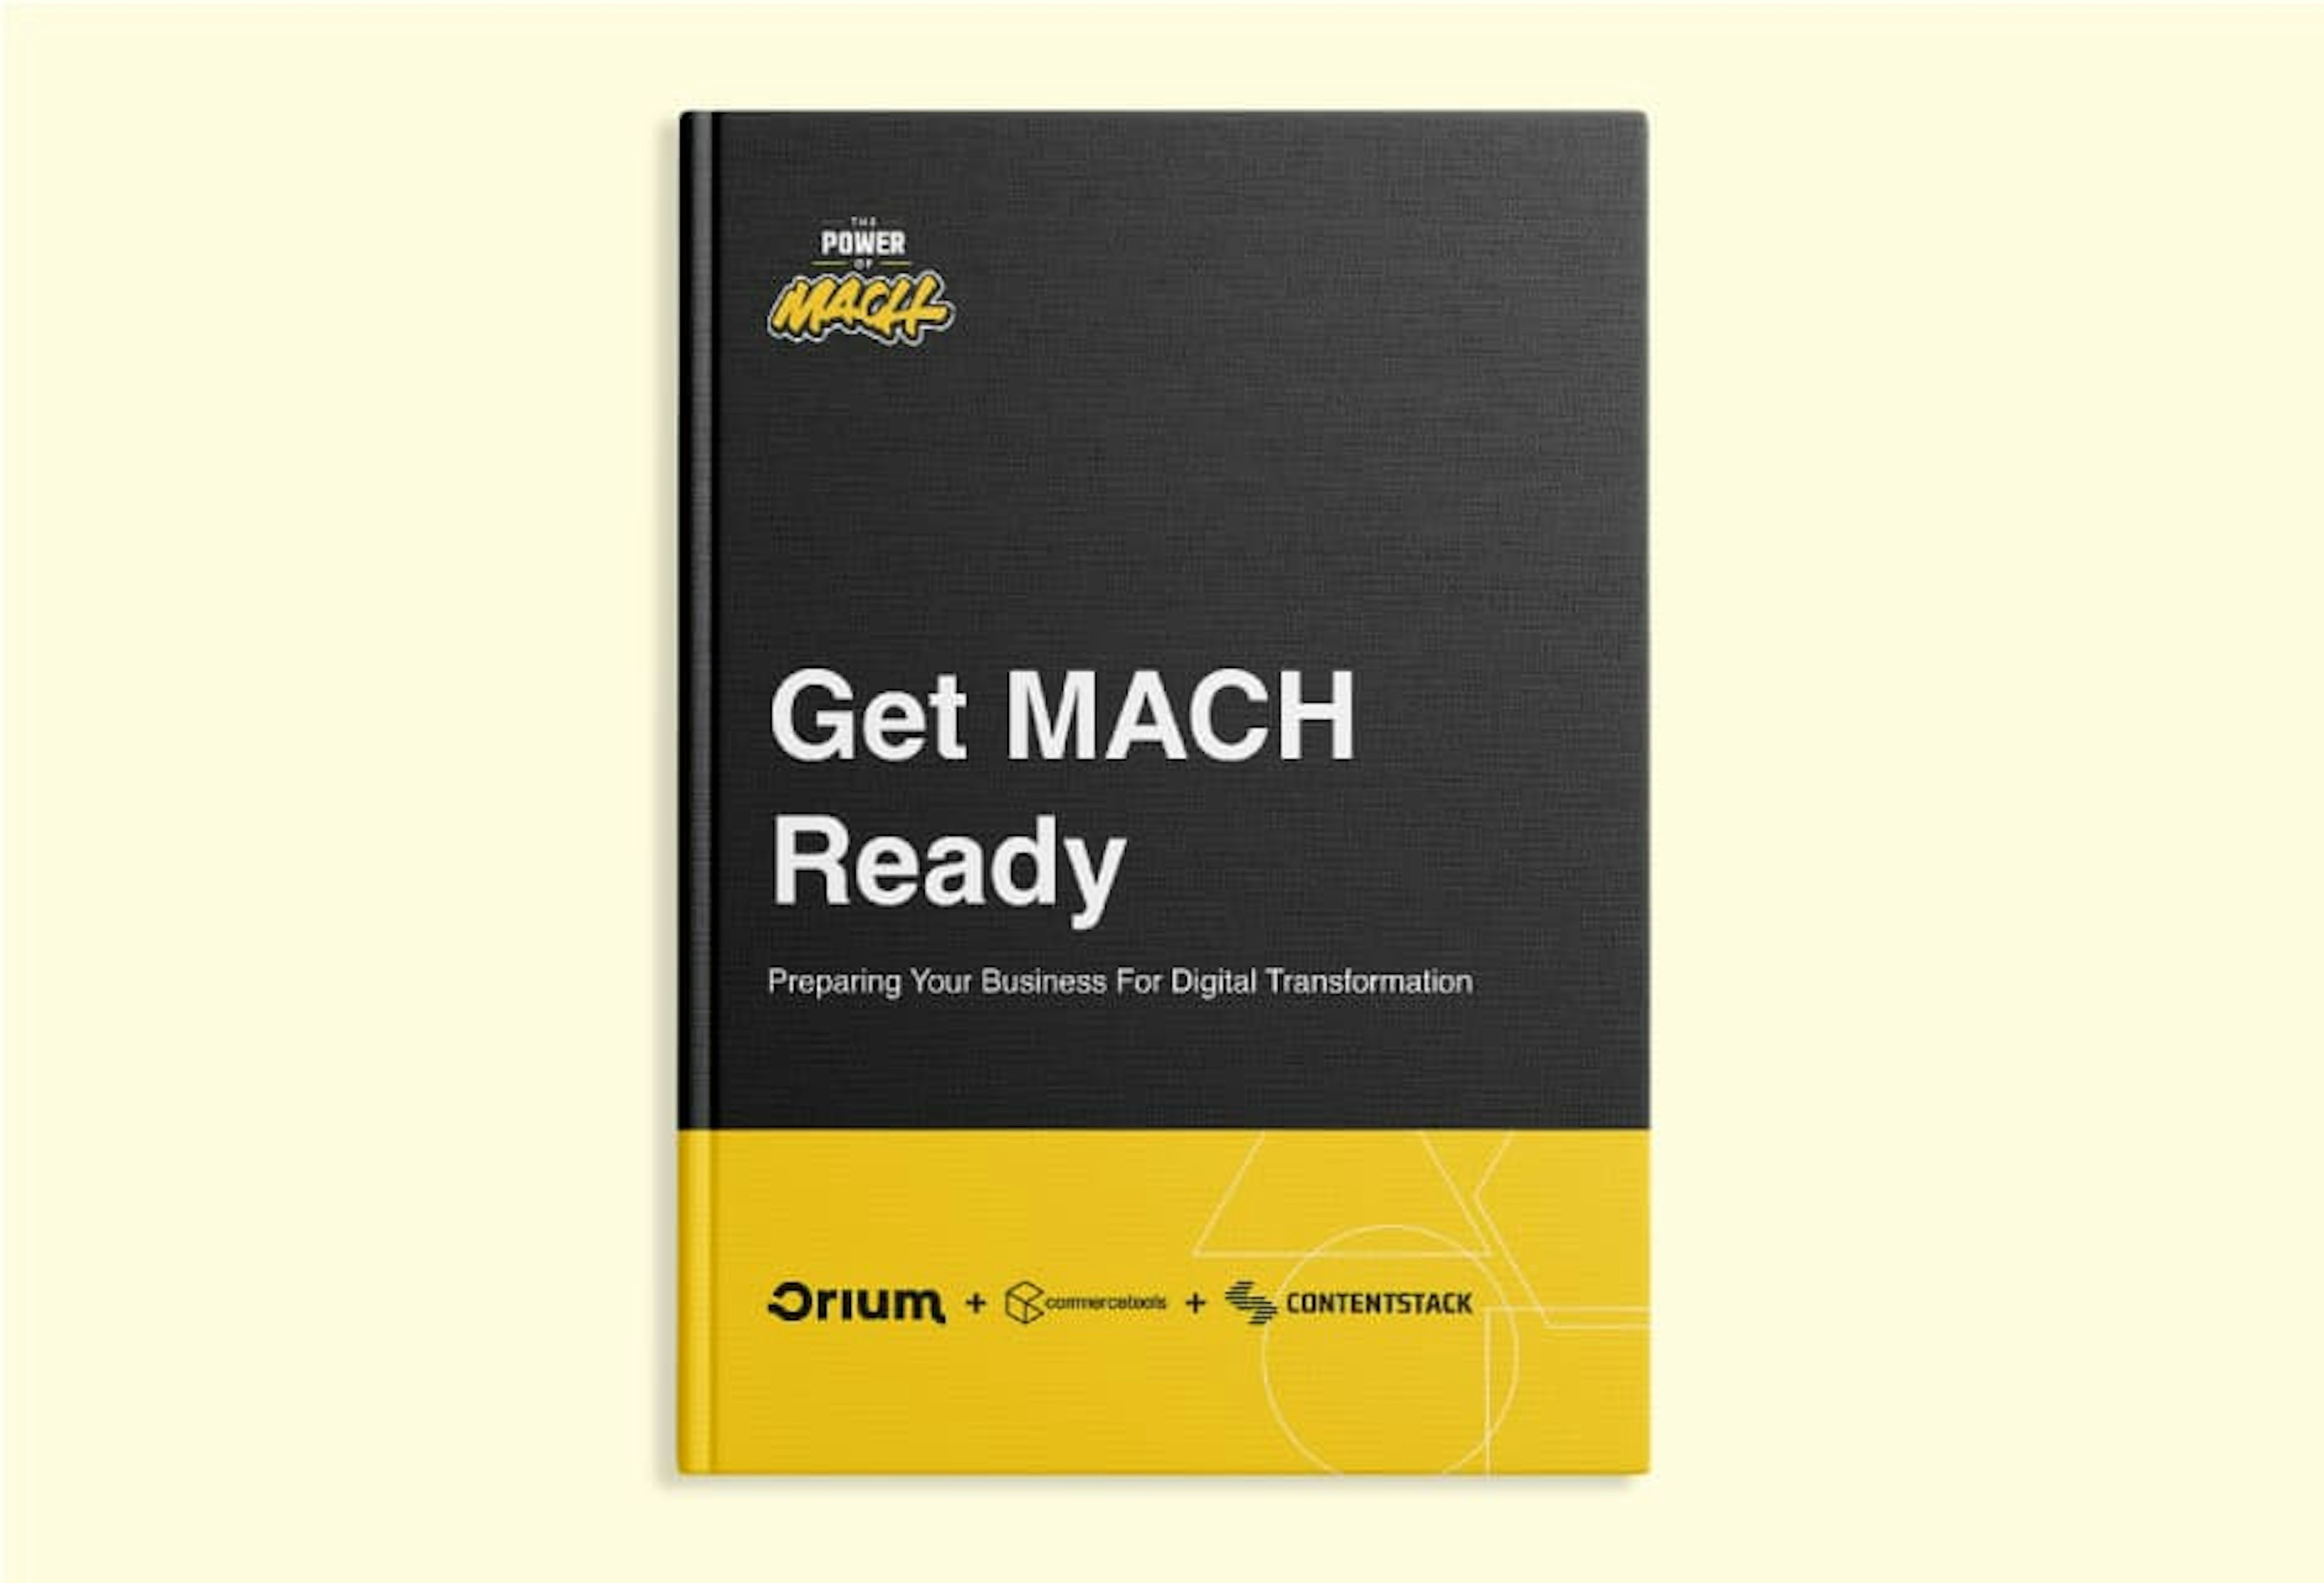 The cover of the Get Mach Ready Report, authored by Orium, commercetools, and Contentstack.